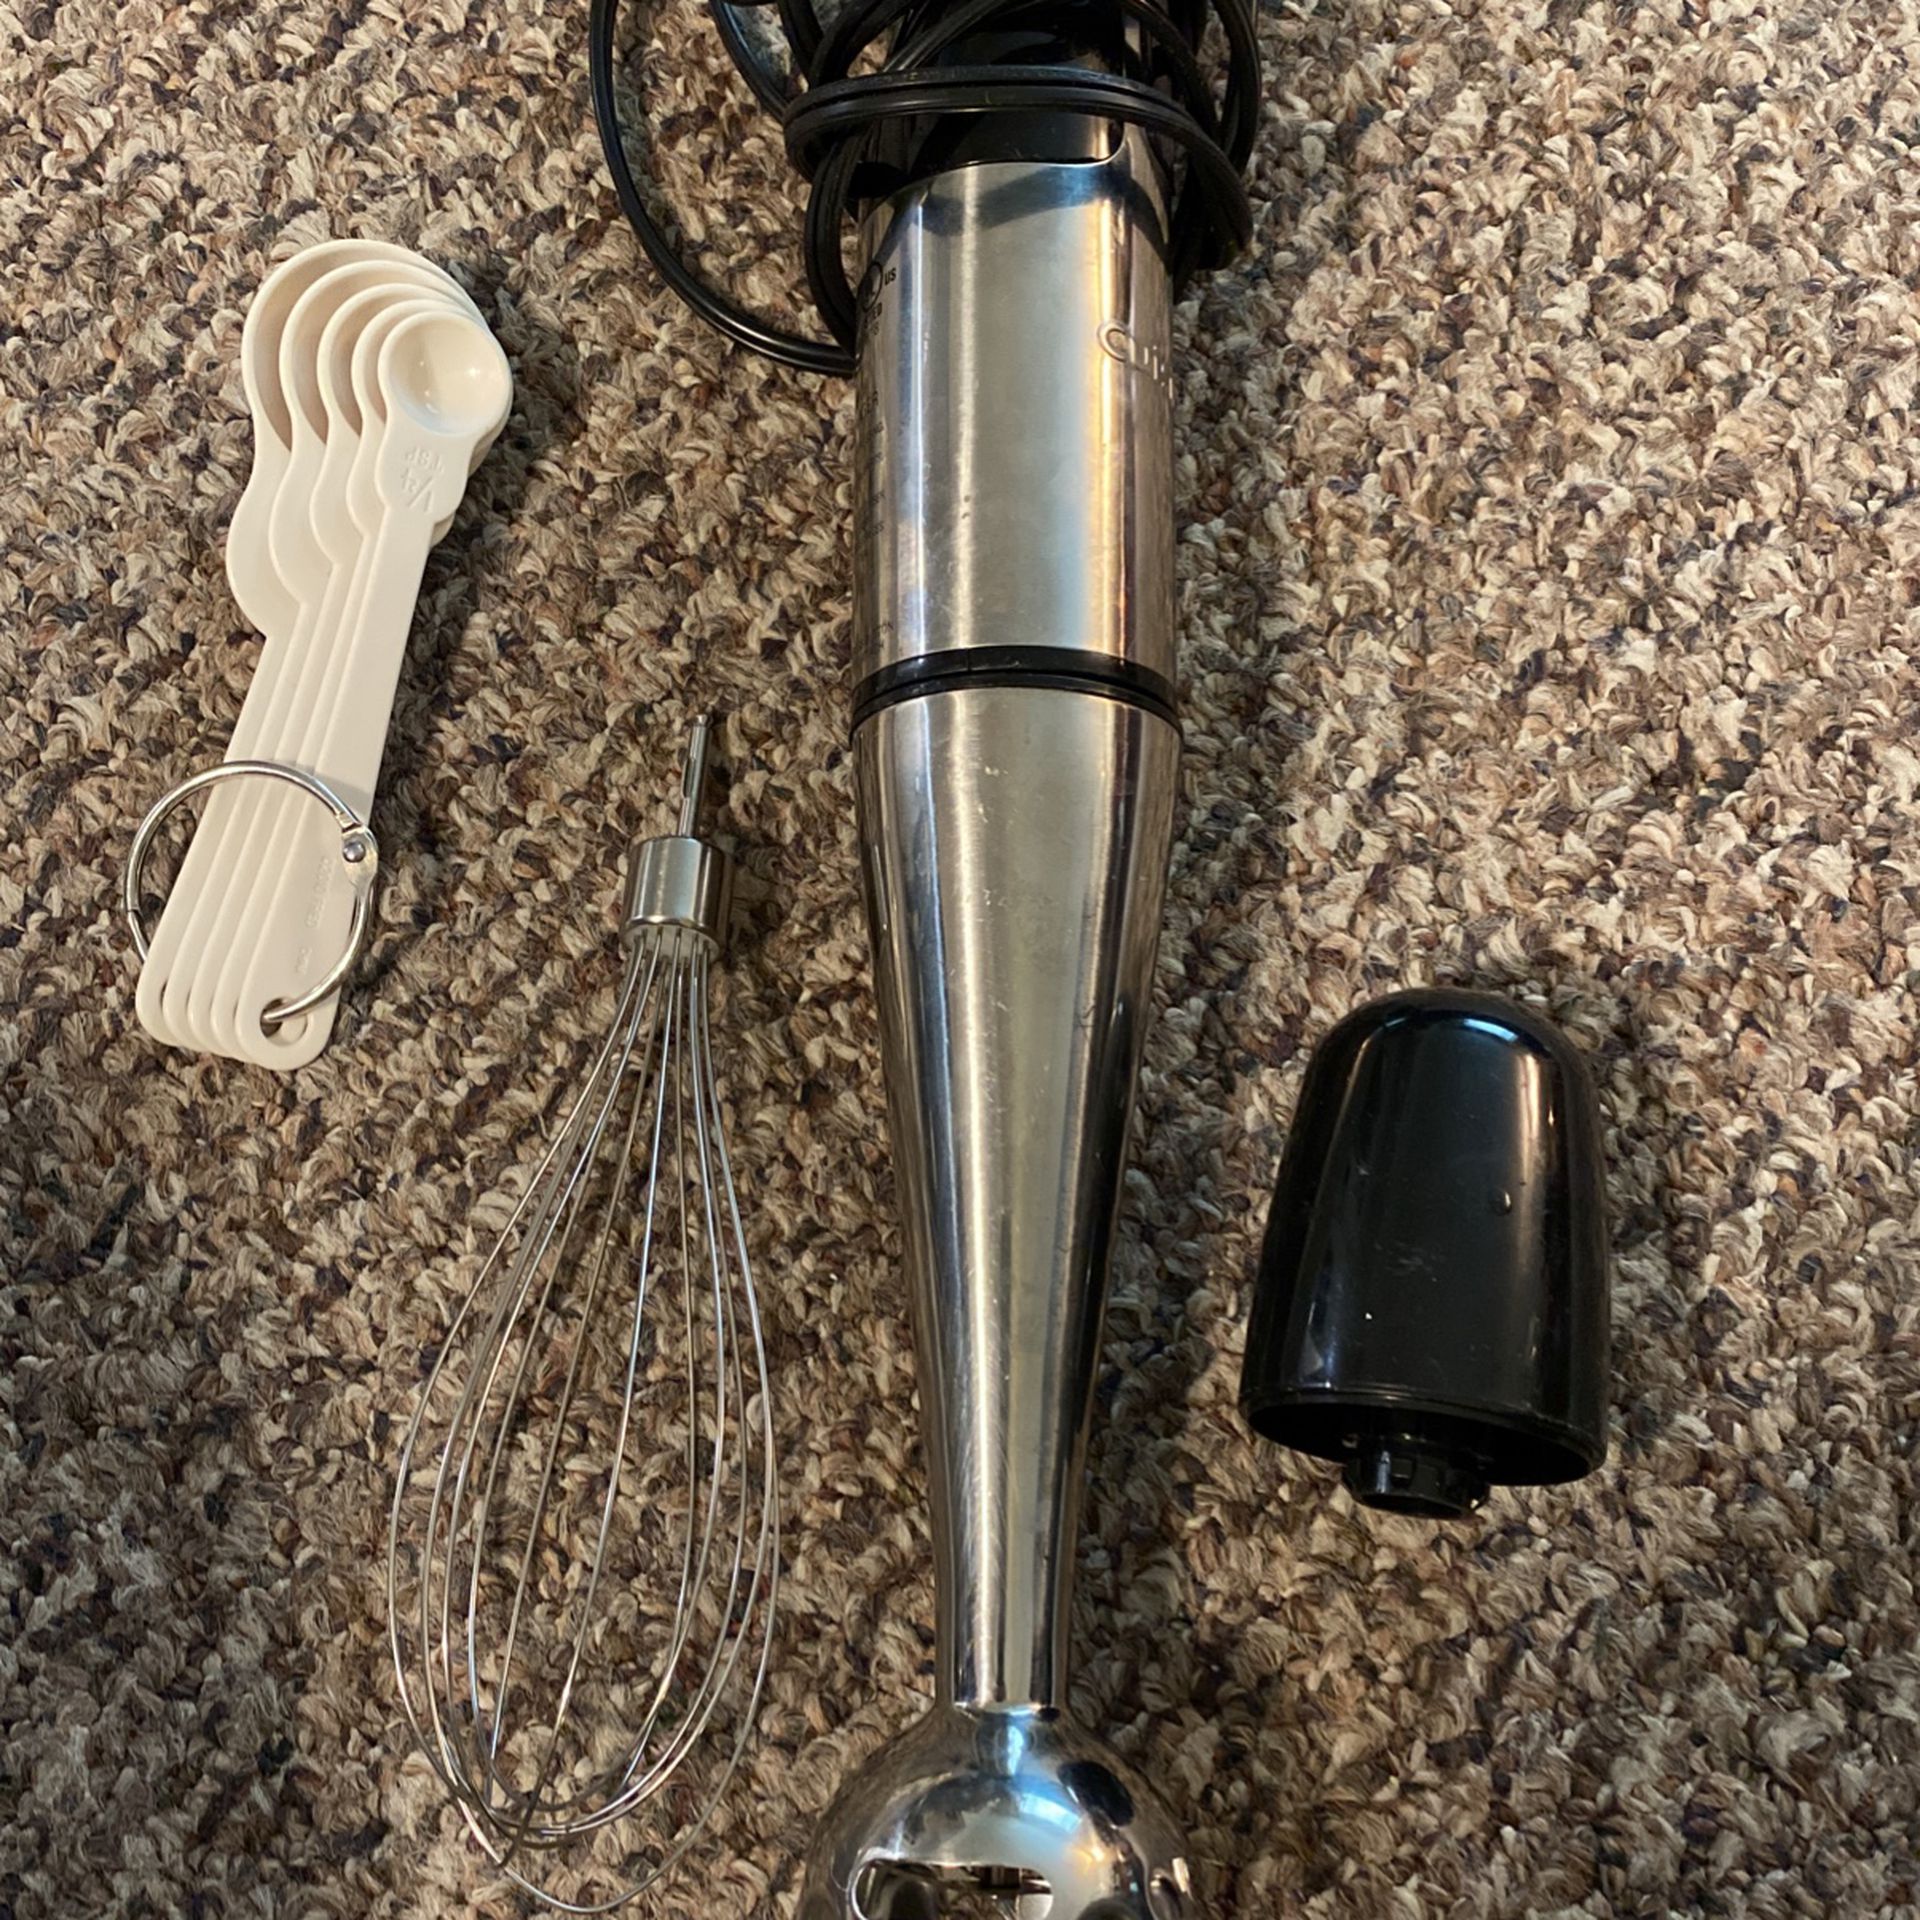 Cuisinart Quick Prep Immersion Blender for Sale in Cleveland, OH - OfferUp